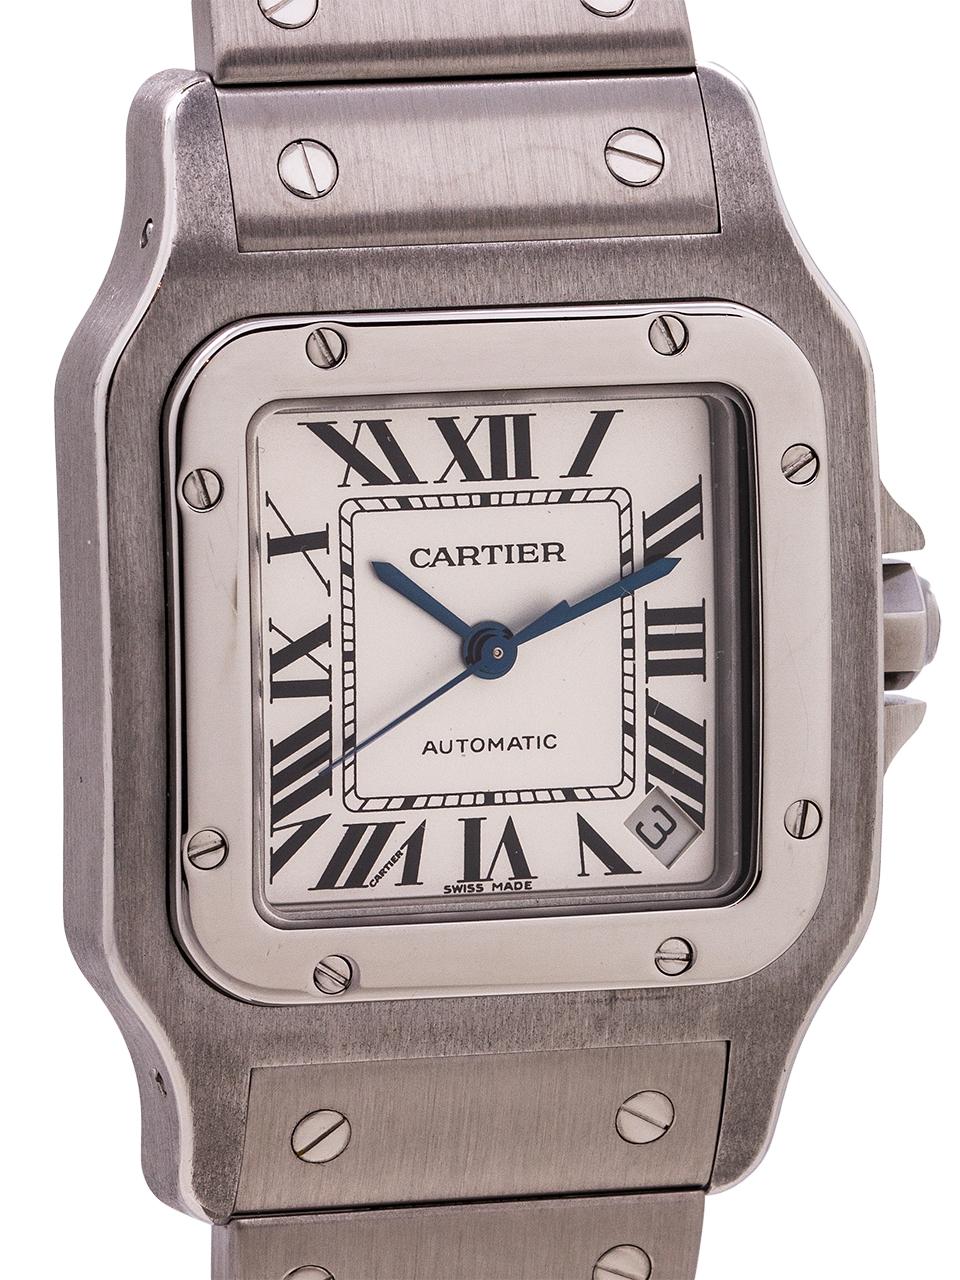 
Cartier Santos Galbe XL ref#2823 stainless steel circa 2012. 34mm diameter thick, curved back case, self winding movement with sweep seconds and date. Classic white dial with Roman figures, blued steel hands and cabachon sapphire crown, With curved